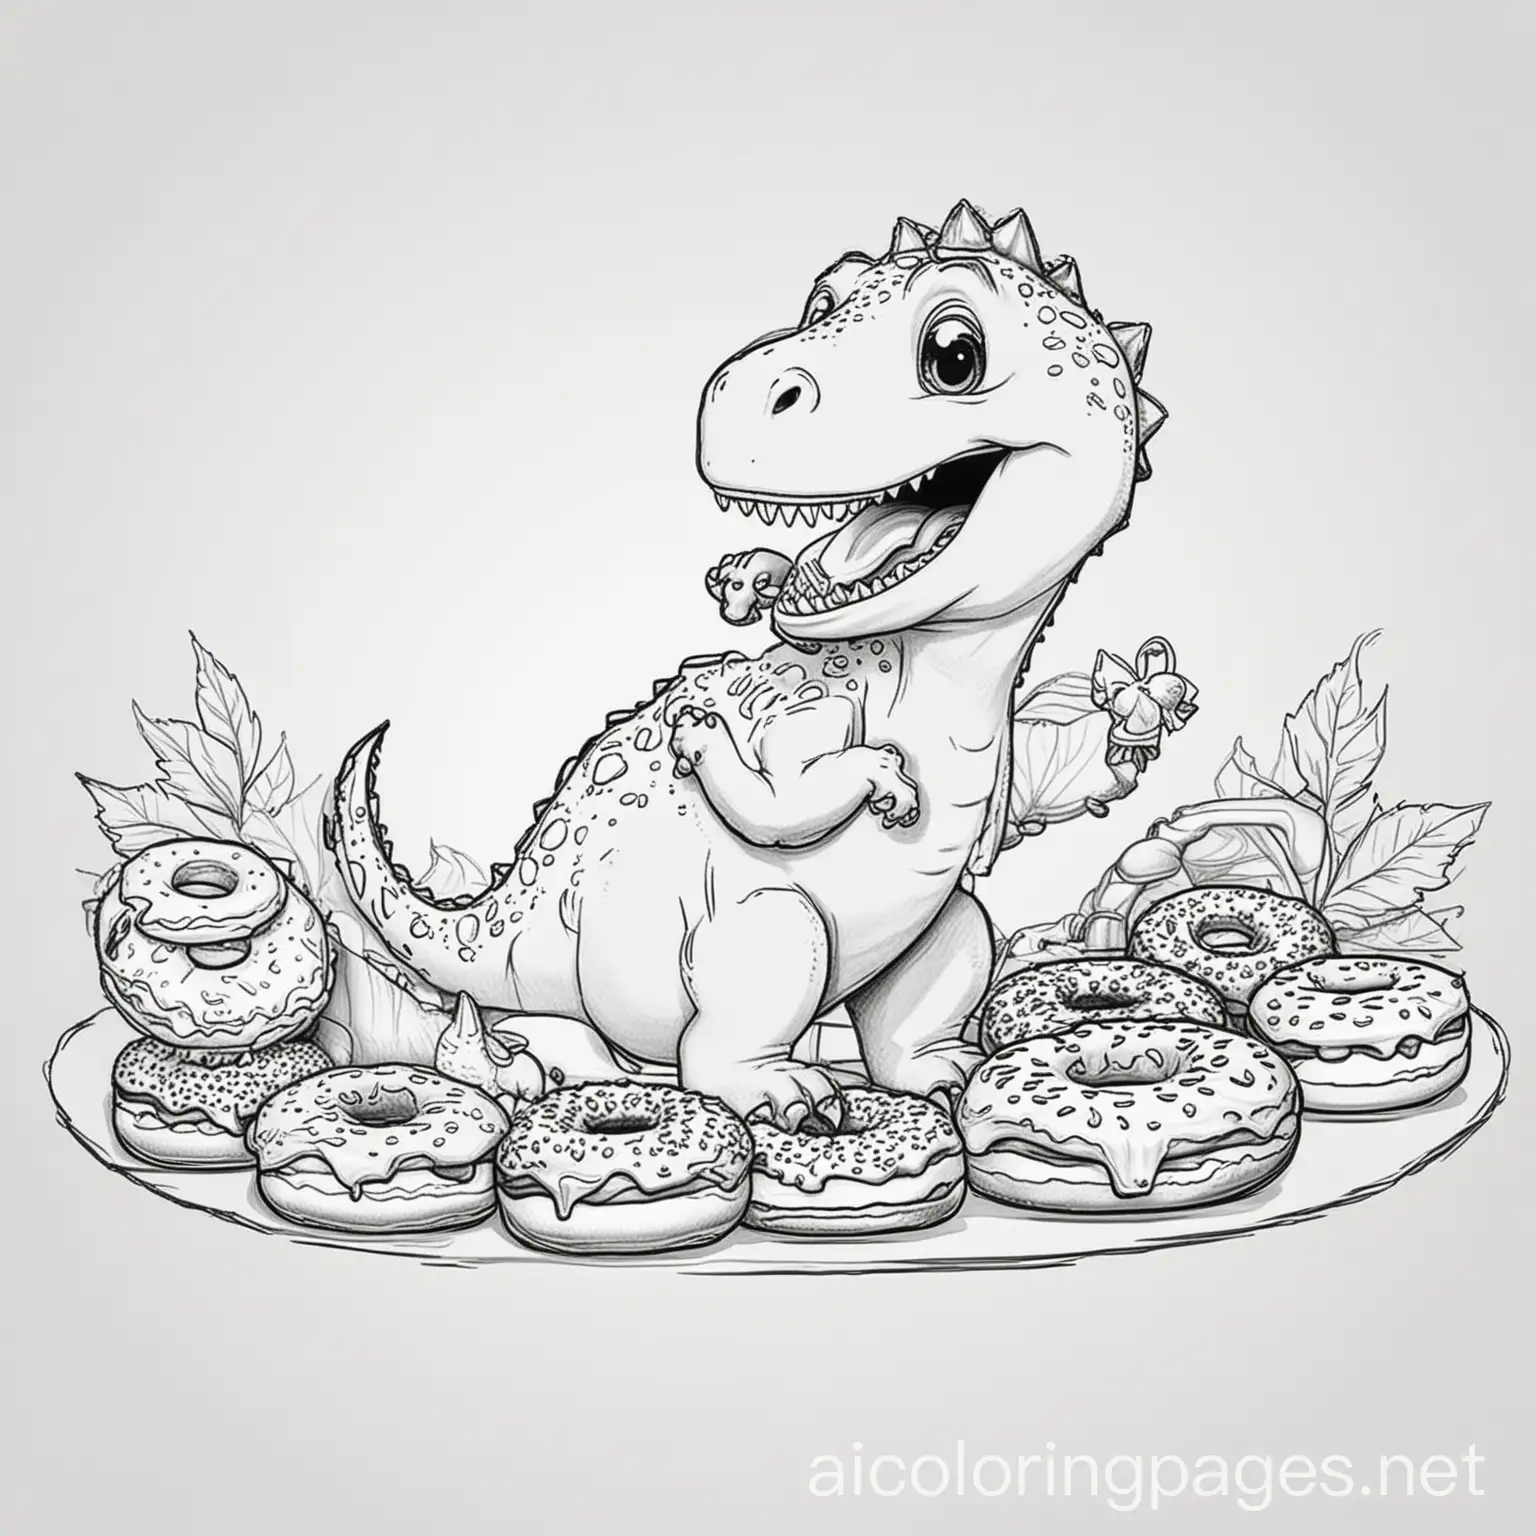 dinosaur eating donuts, Coloring Page, black and white, line art, white background, Simplicity, Ample White Space. The background of the coloring page is plain white to make it easy for young children to color within the lines. The outlines of all the subjects are easy to distinguish, making it simple for kids to color without too much difficulty 